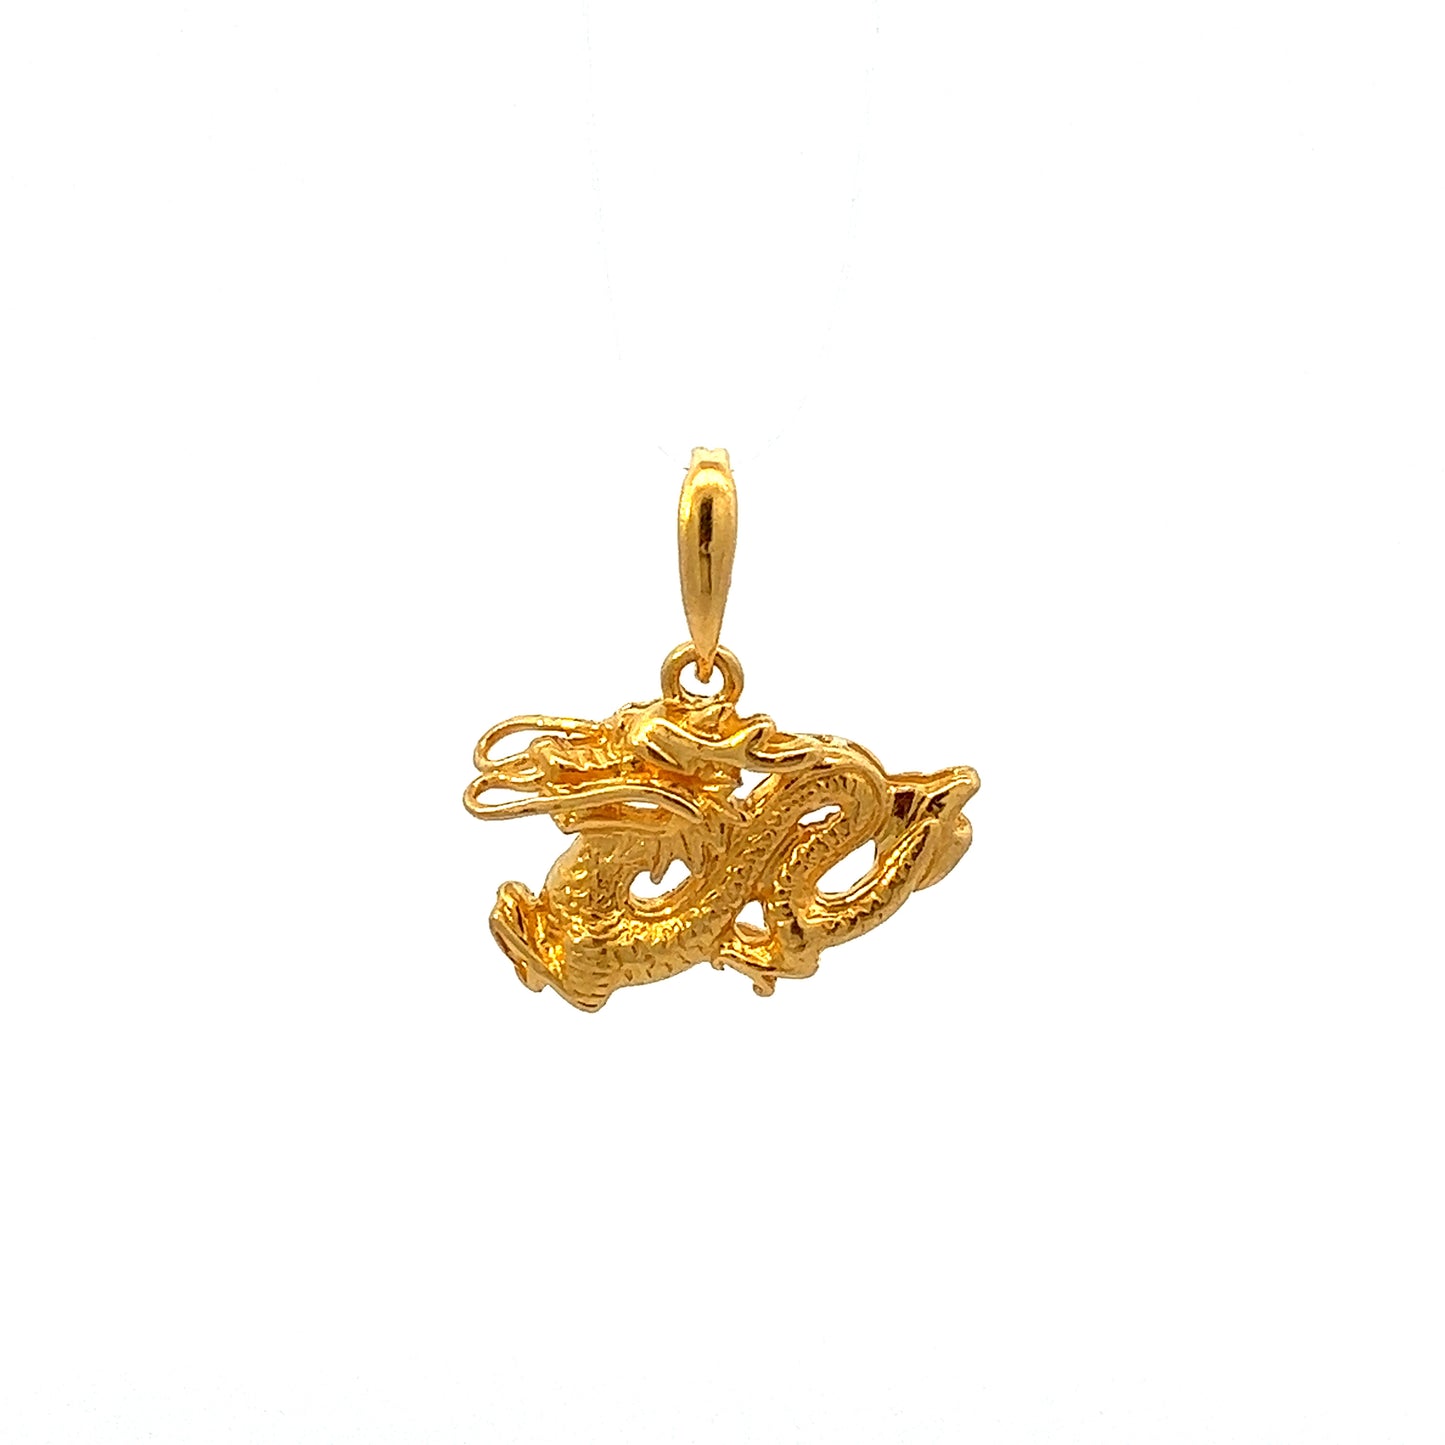 GOLD PENDANT ( 22K ) ( 2.39g ) - 0013893 Chain sold separately